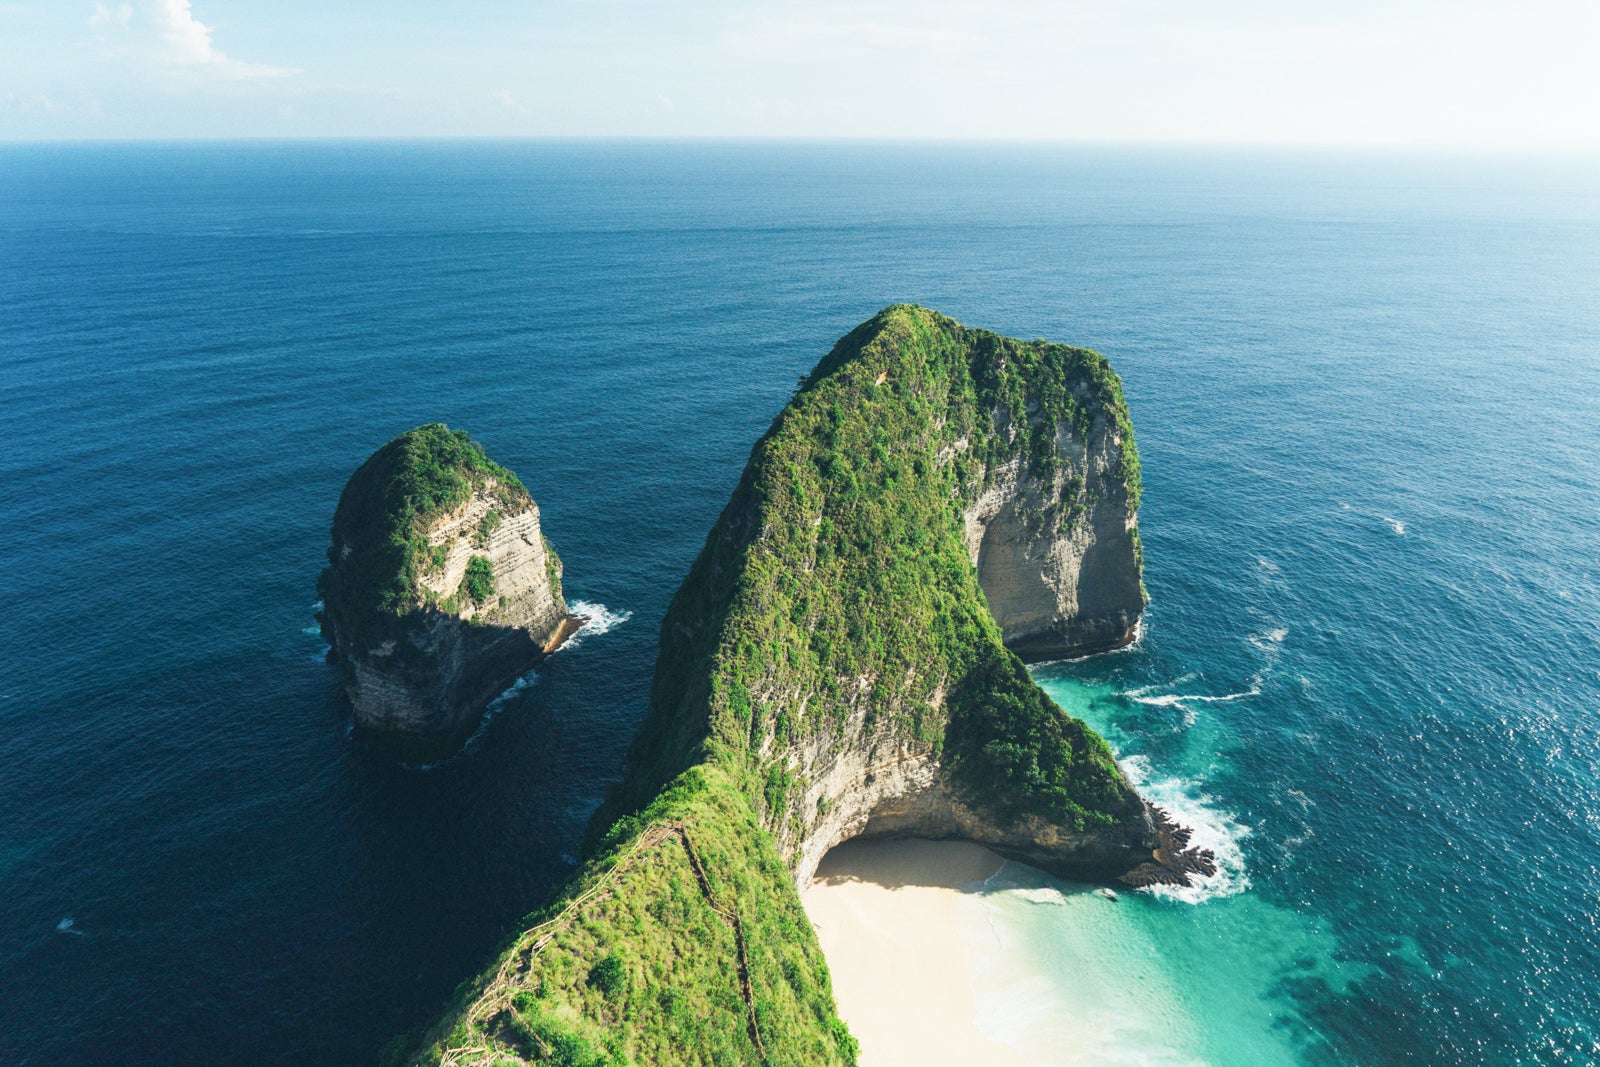 indonesia_feature_james-connolly-unsplash